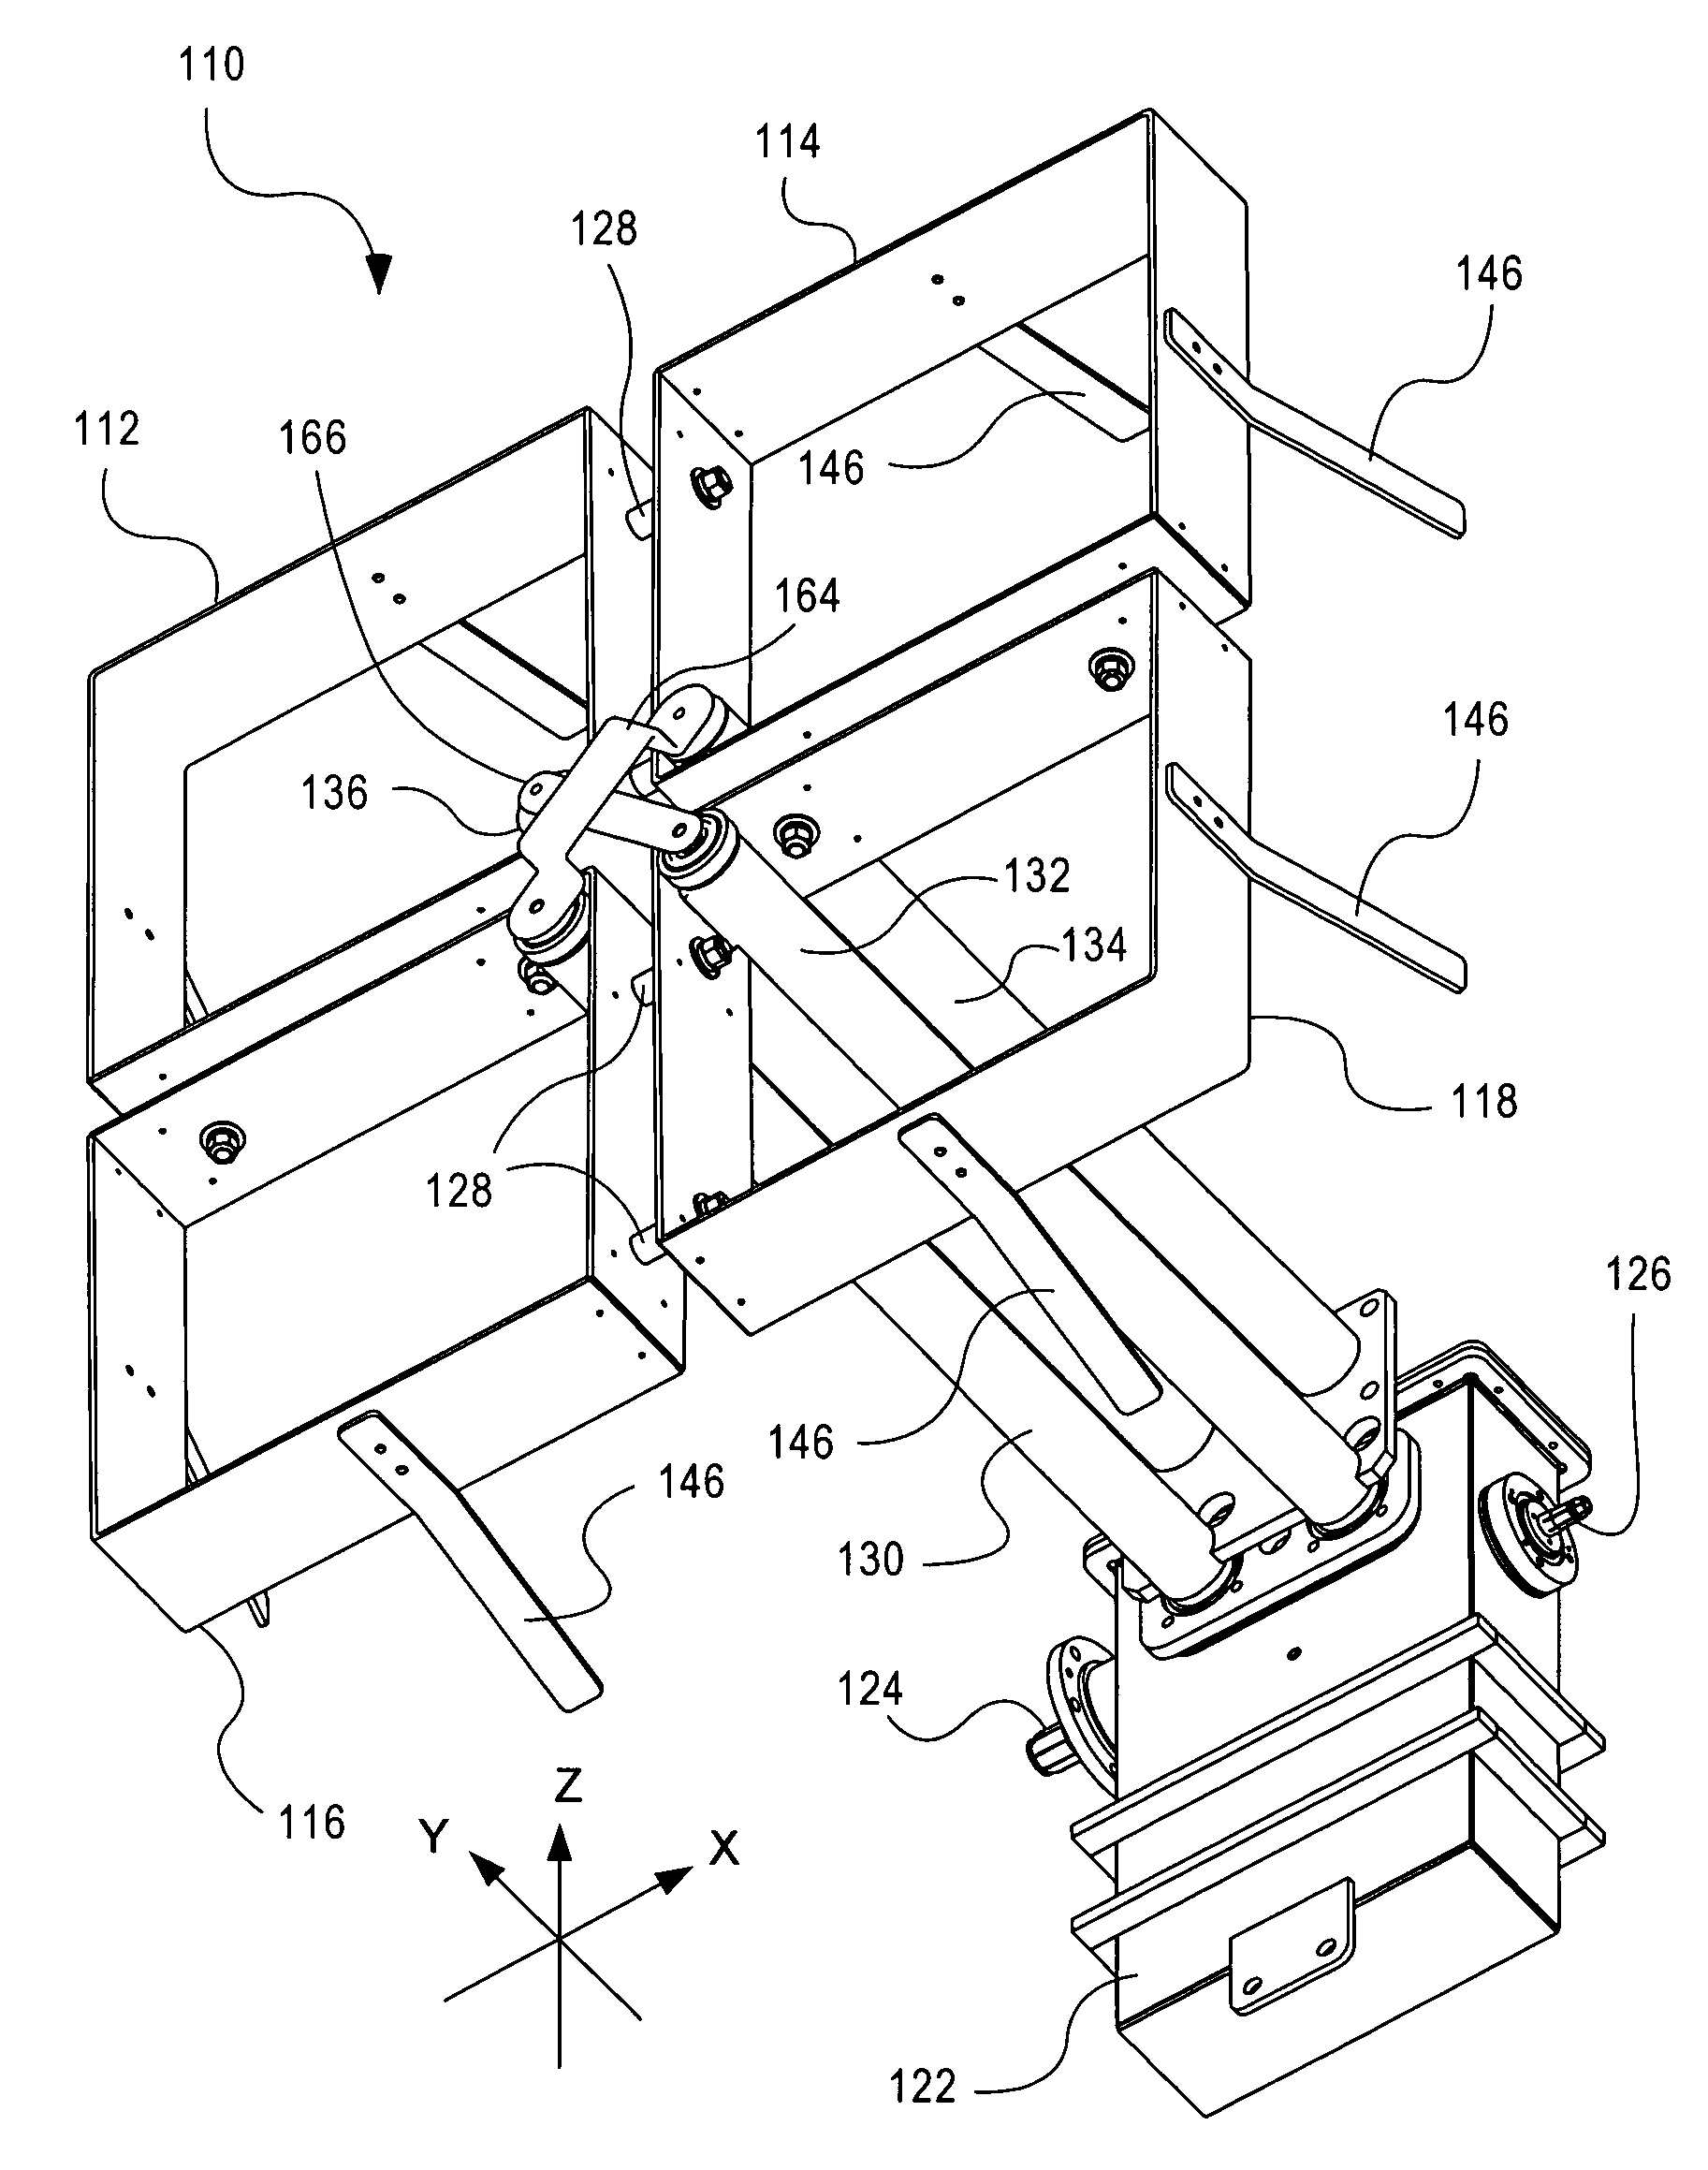 Antenna system and method to transmit cross-polarized signals from a common radiator with low mutual coupling